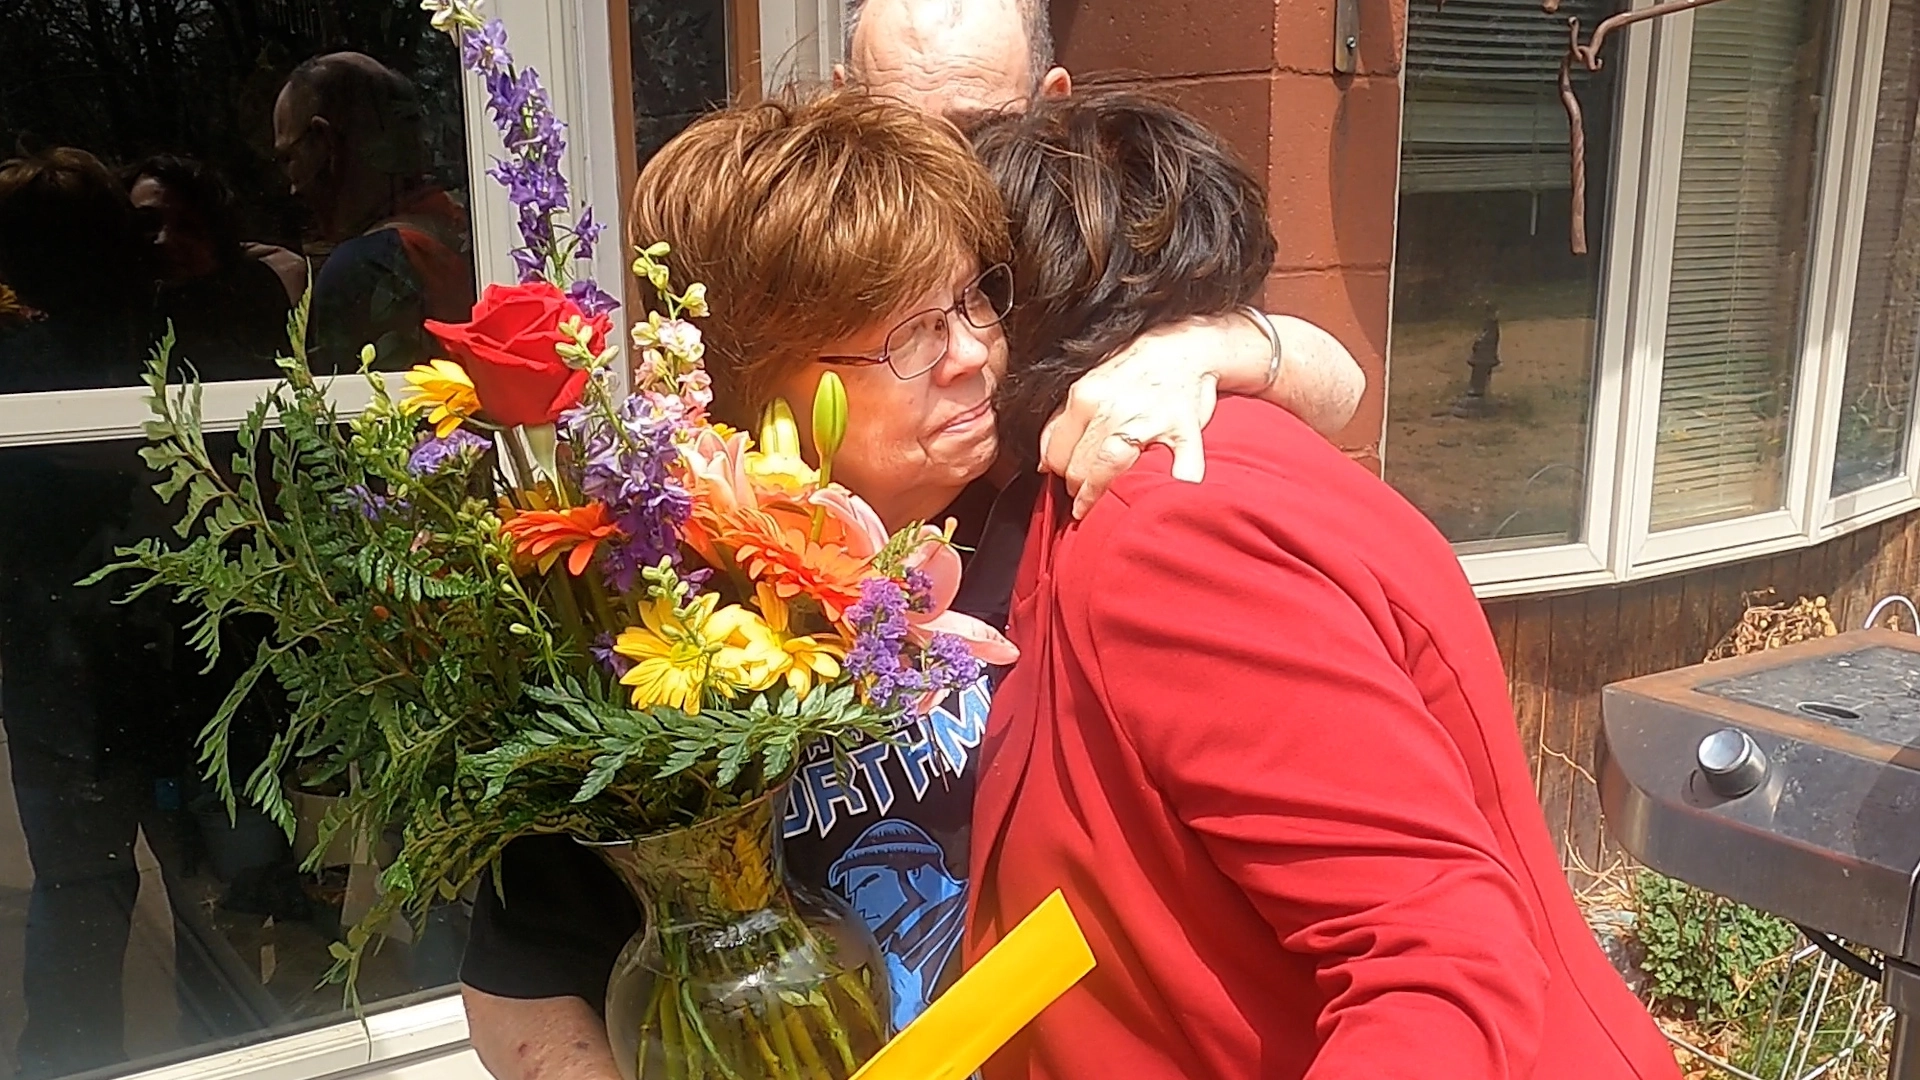 Woman hugging an older woman who is holding a vase of flowers and yellow envelope outside